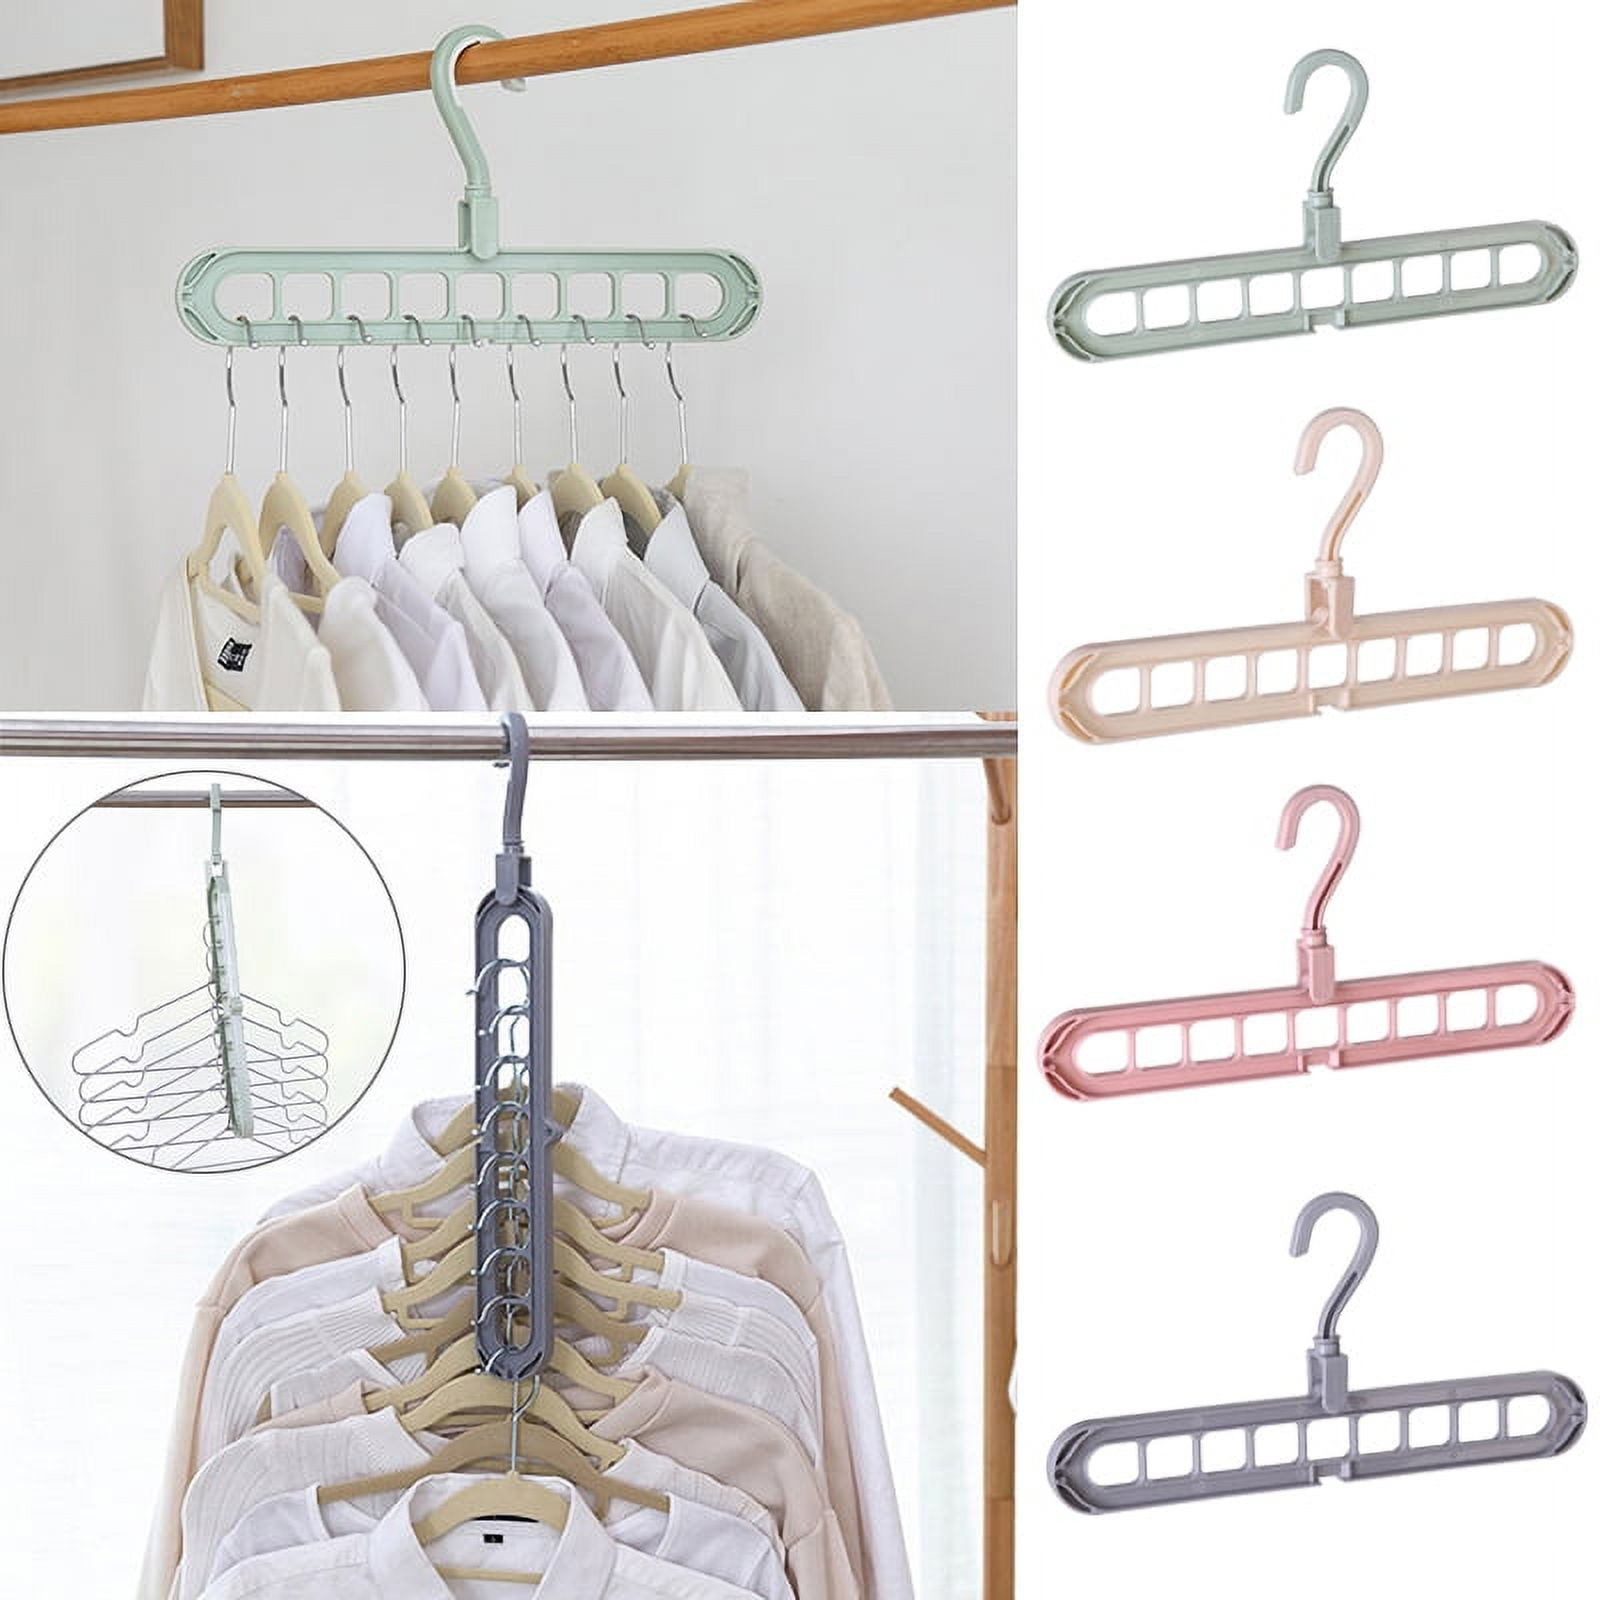 Wisconic Adult Plastic Clothing Hanger, Slotted for Strappy Shirts